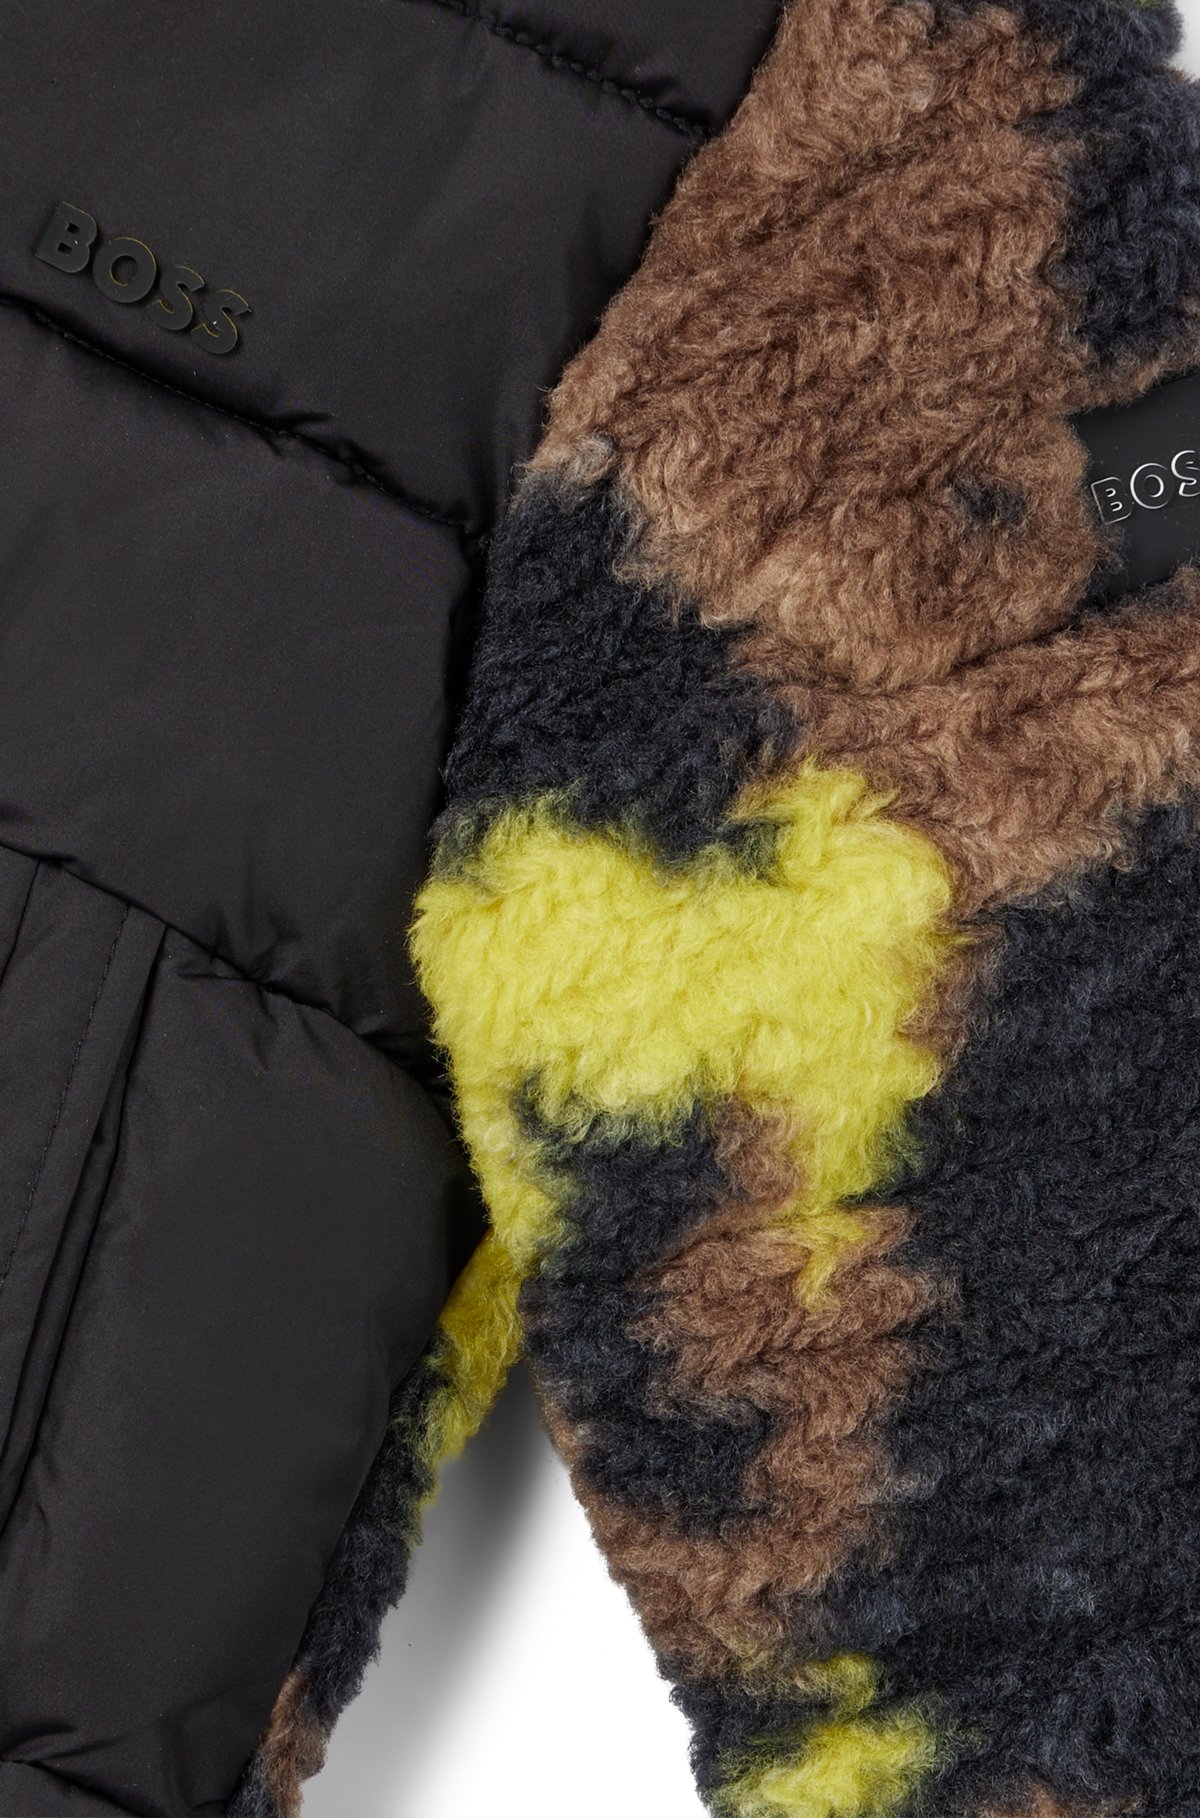 Kids' jacket with camouflage sherpa accents, Black